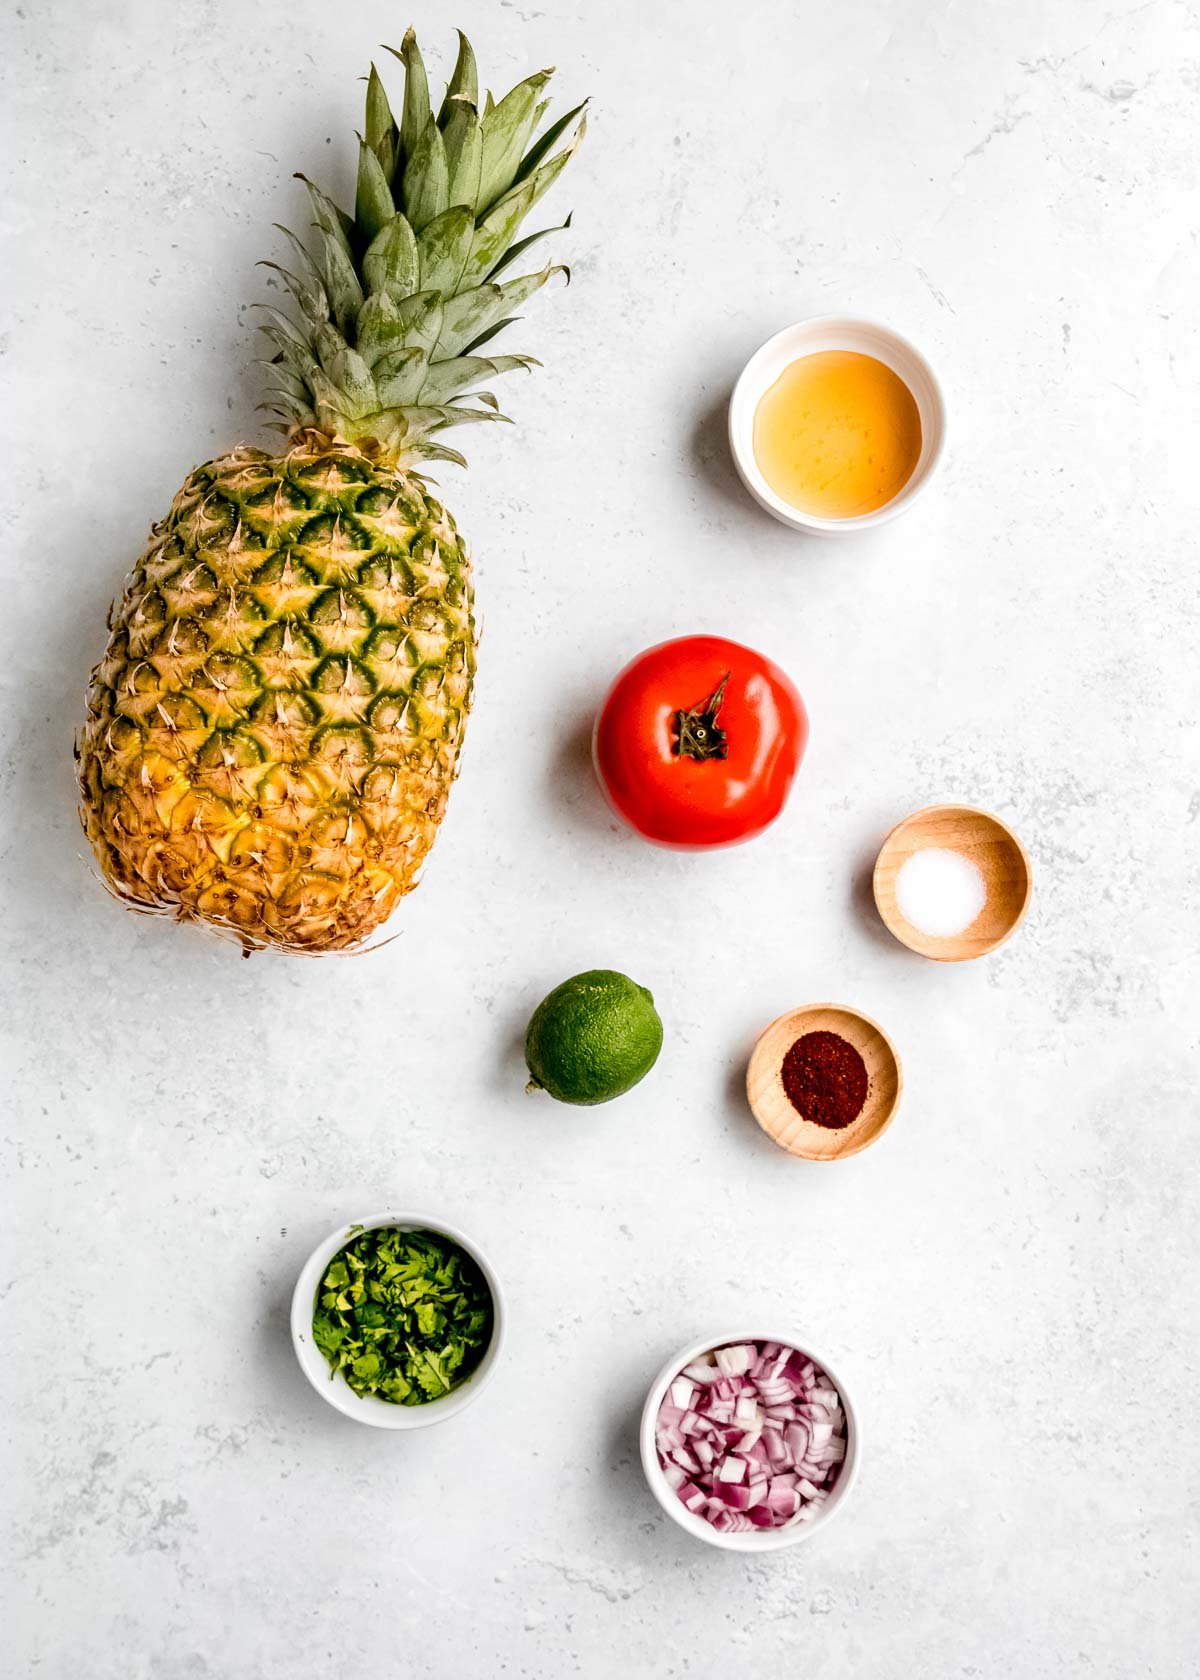 ingredients for pineapple salsa, including a fresh pineapple, tomato, lime, apple cider vinegar, salt, chili powder, chopped red onion, and chopped cilantro